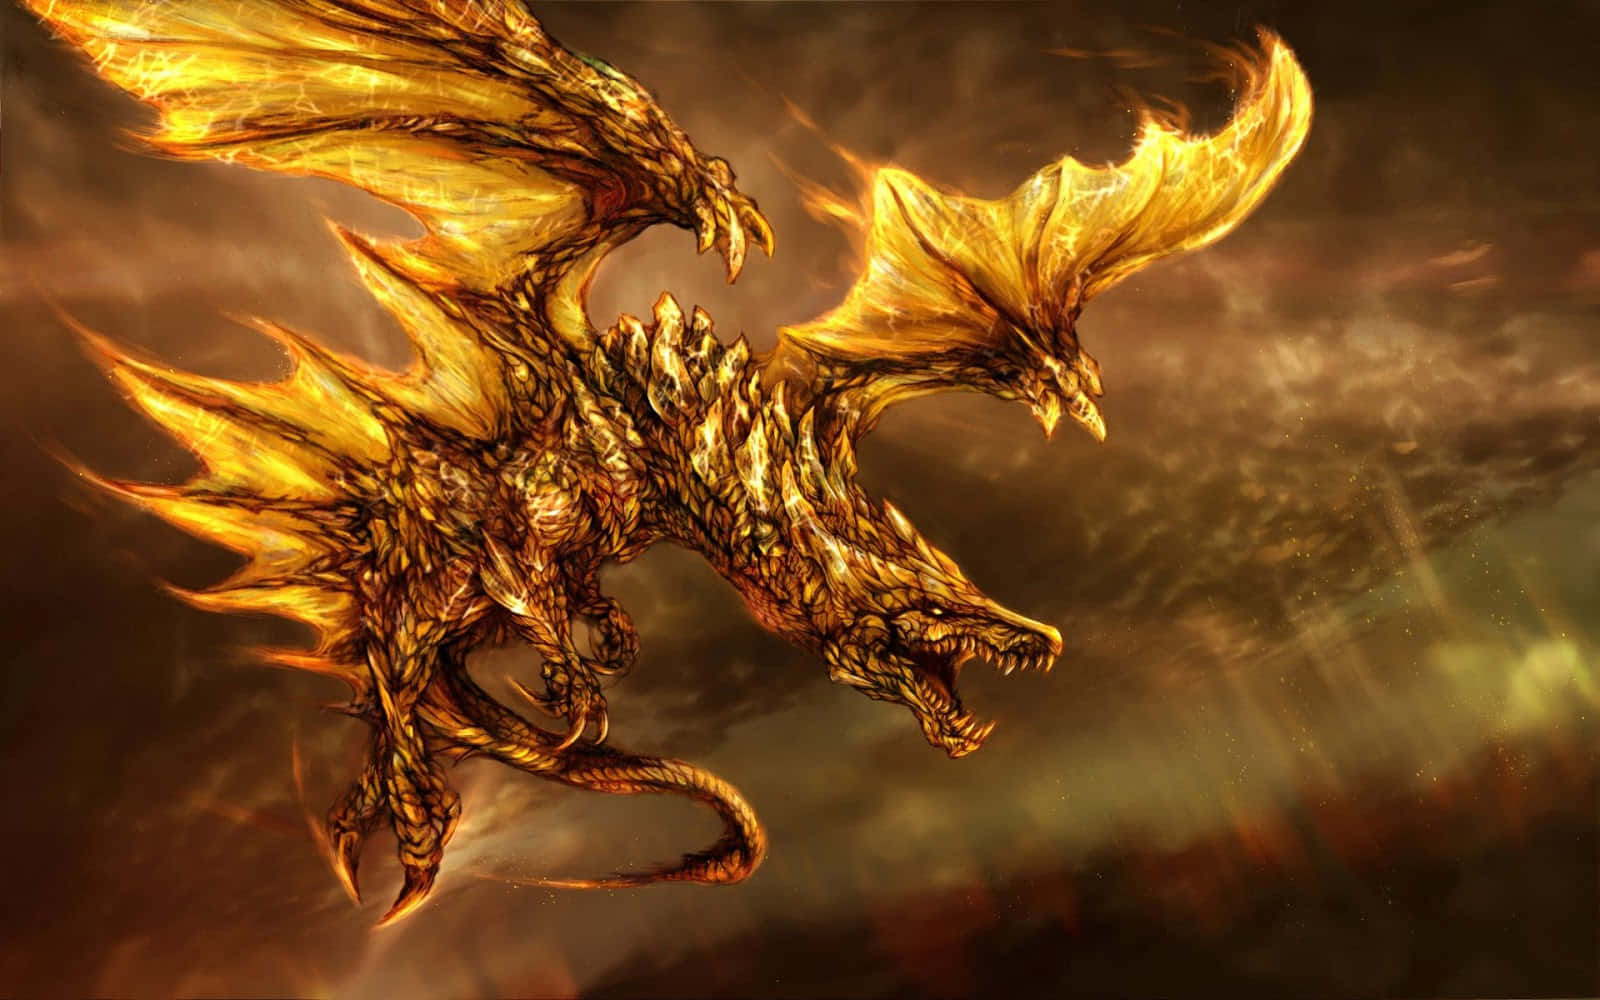 A majestic and powerful dragon takes flight Wallpaper